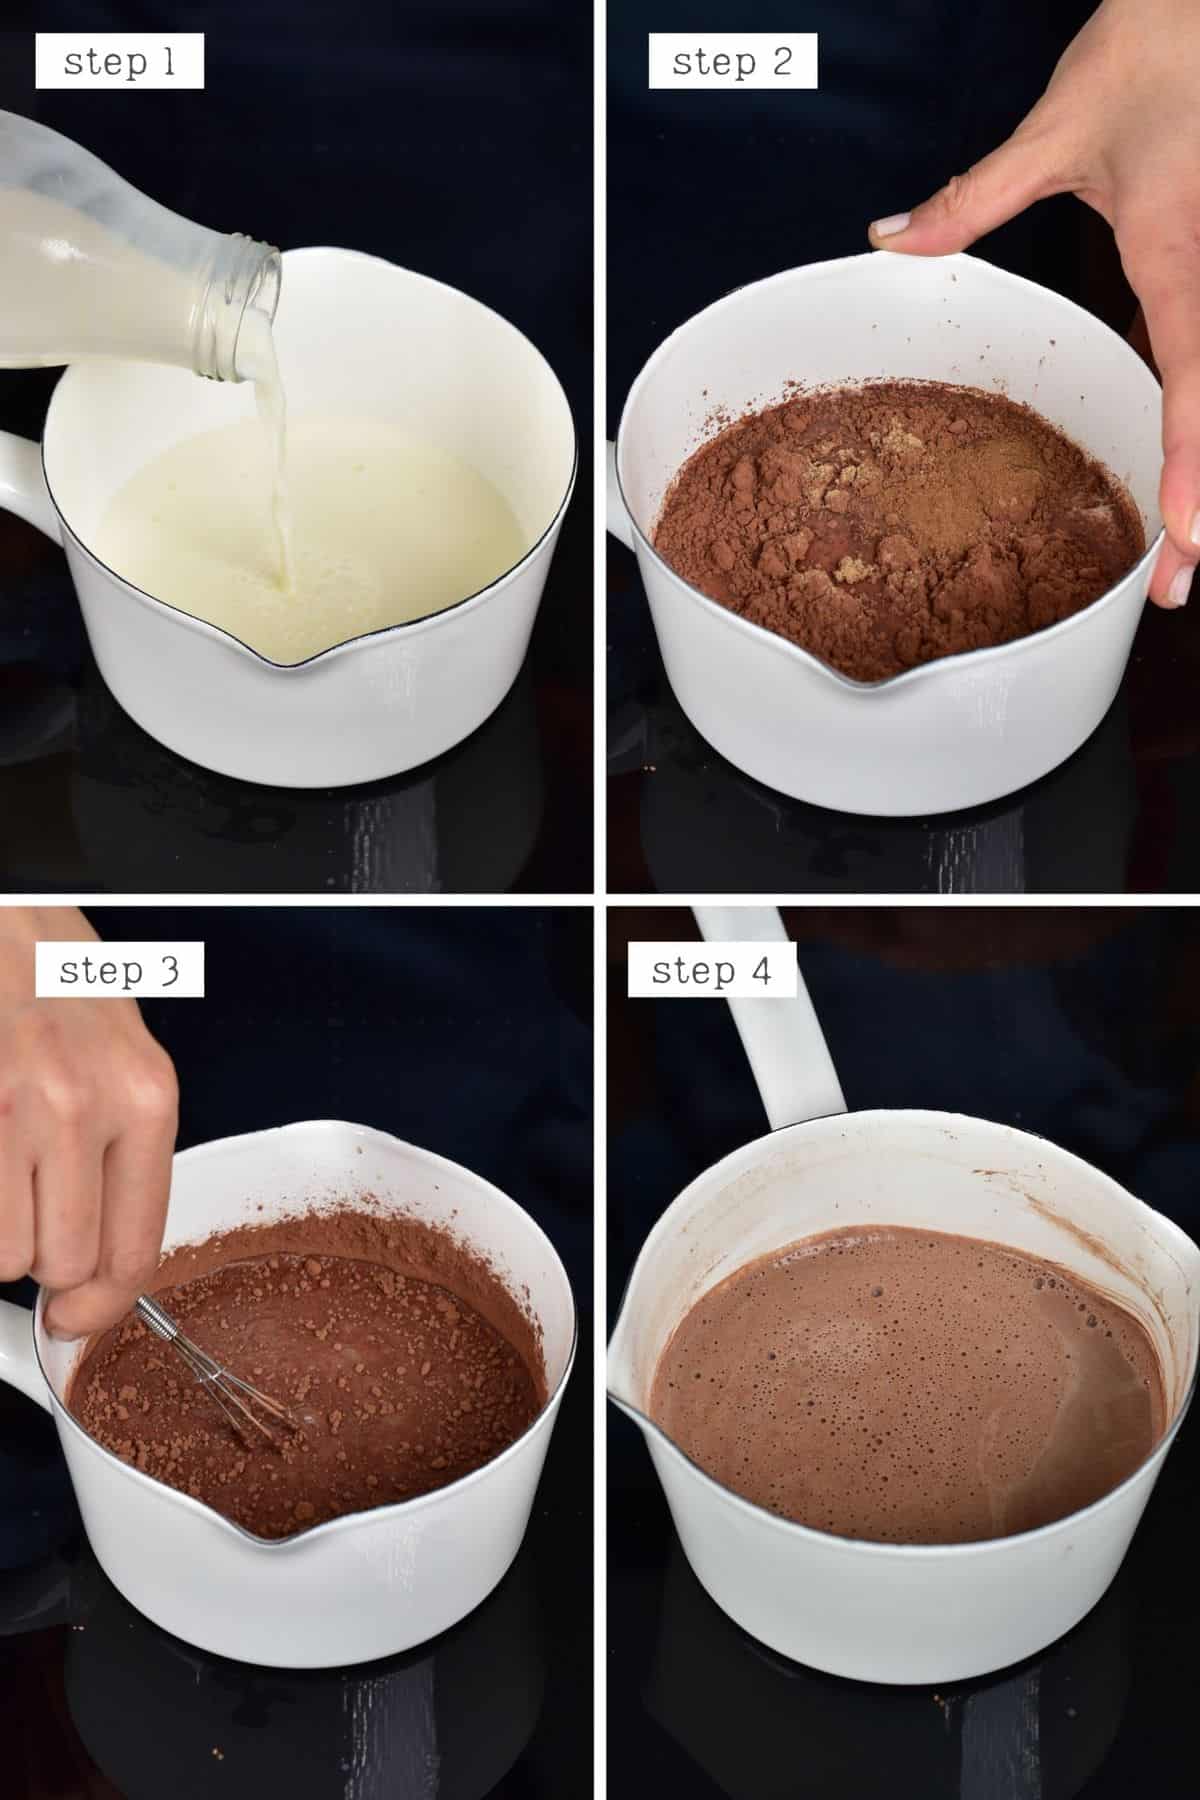 Steps for making hot chocolate